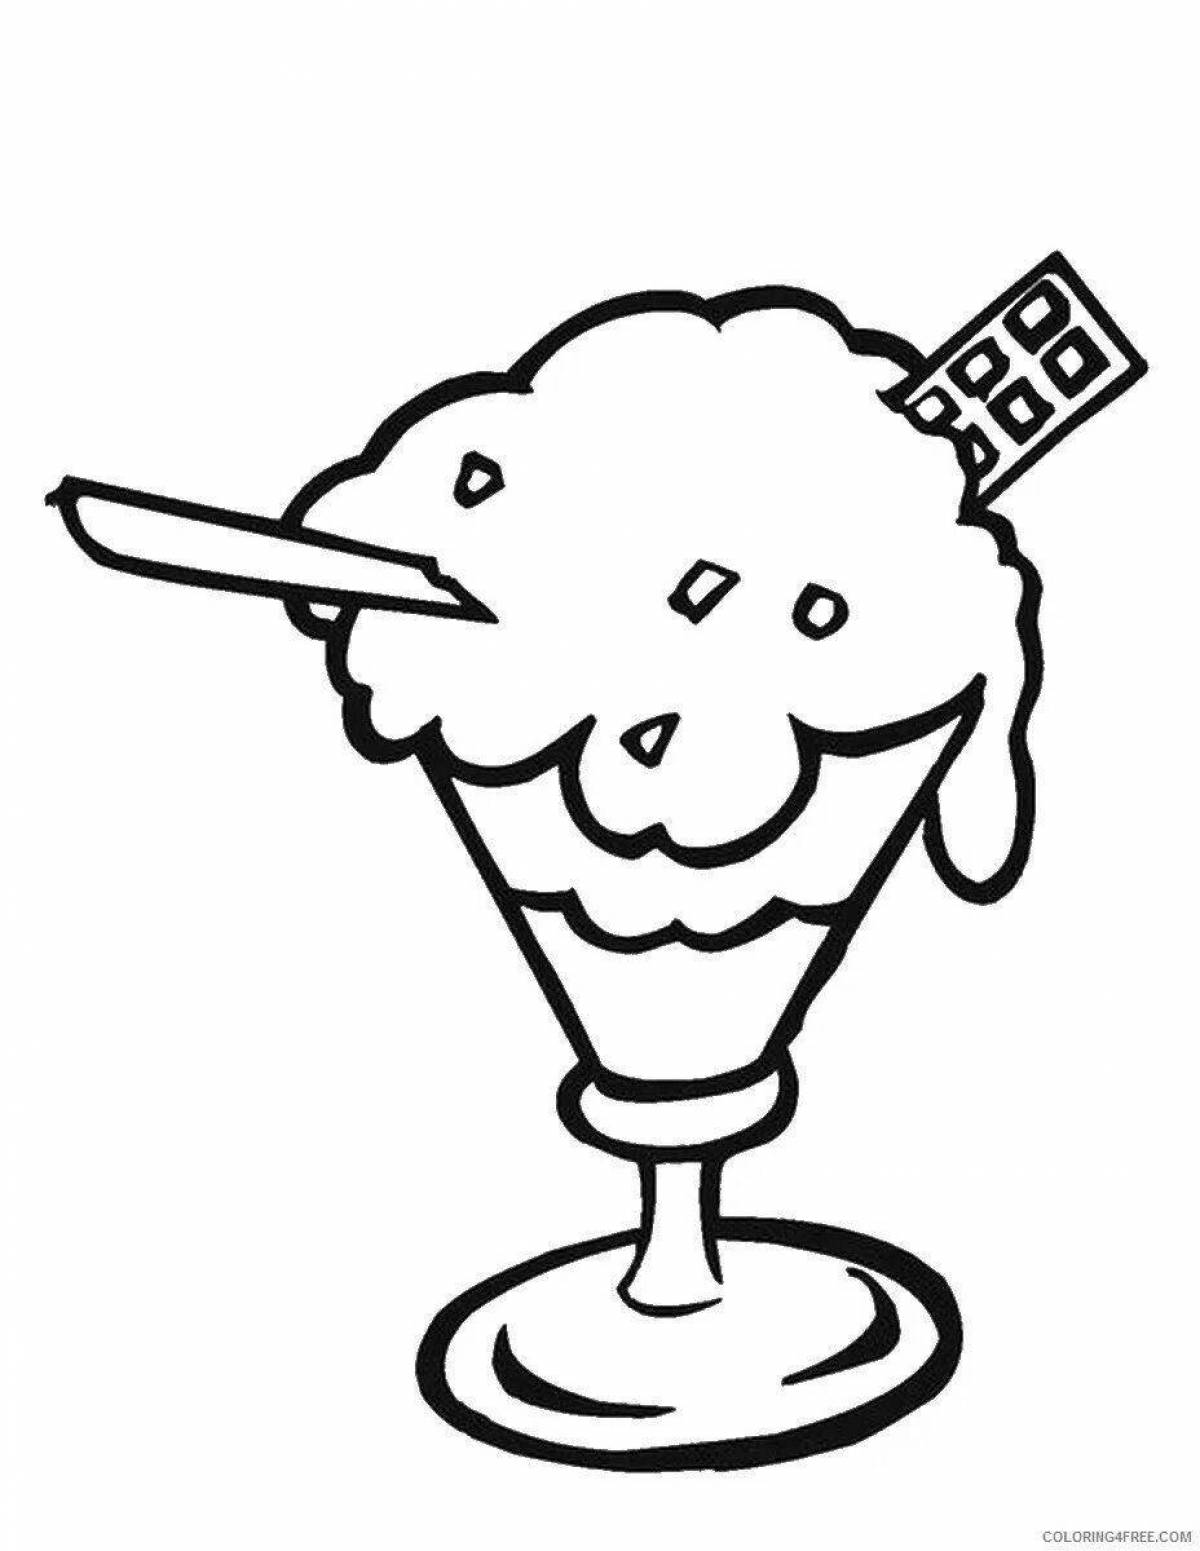 Coloring page adorable ice cream